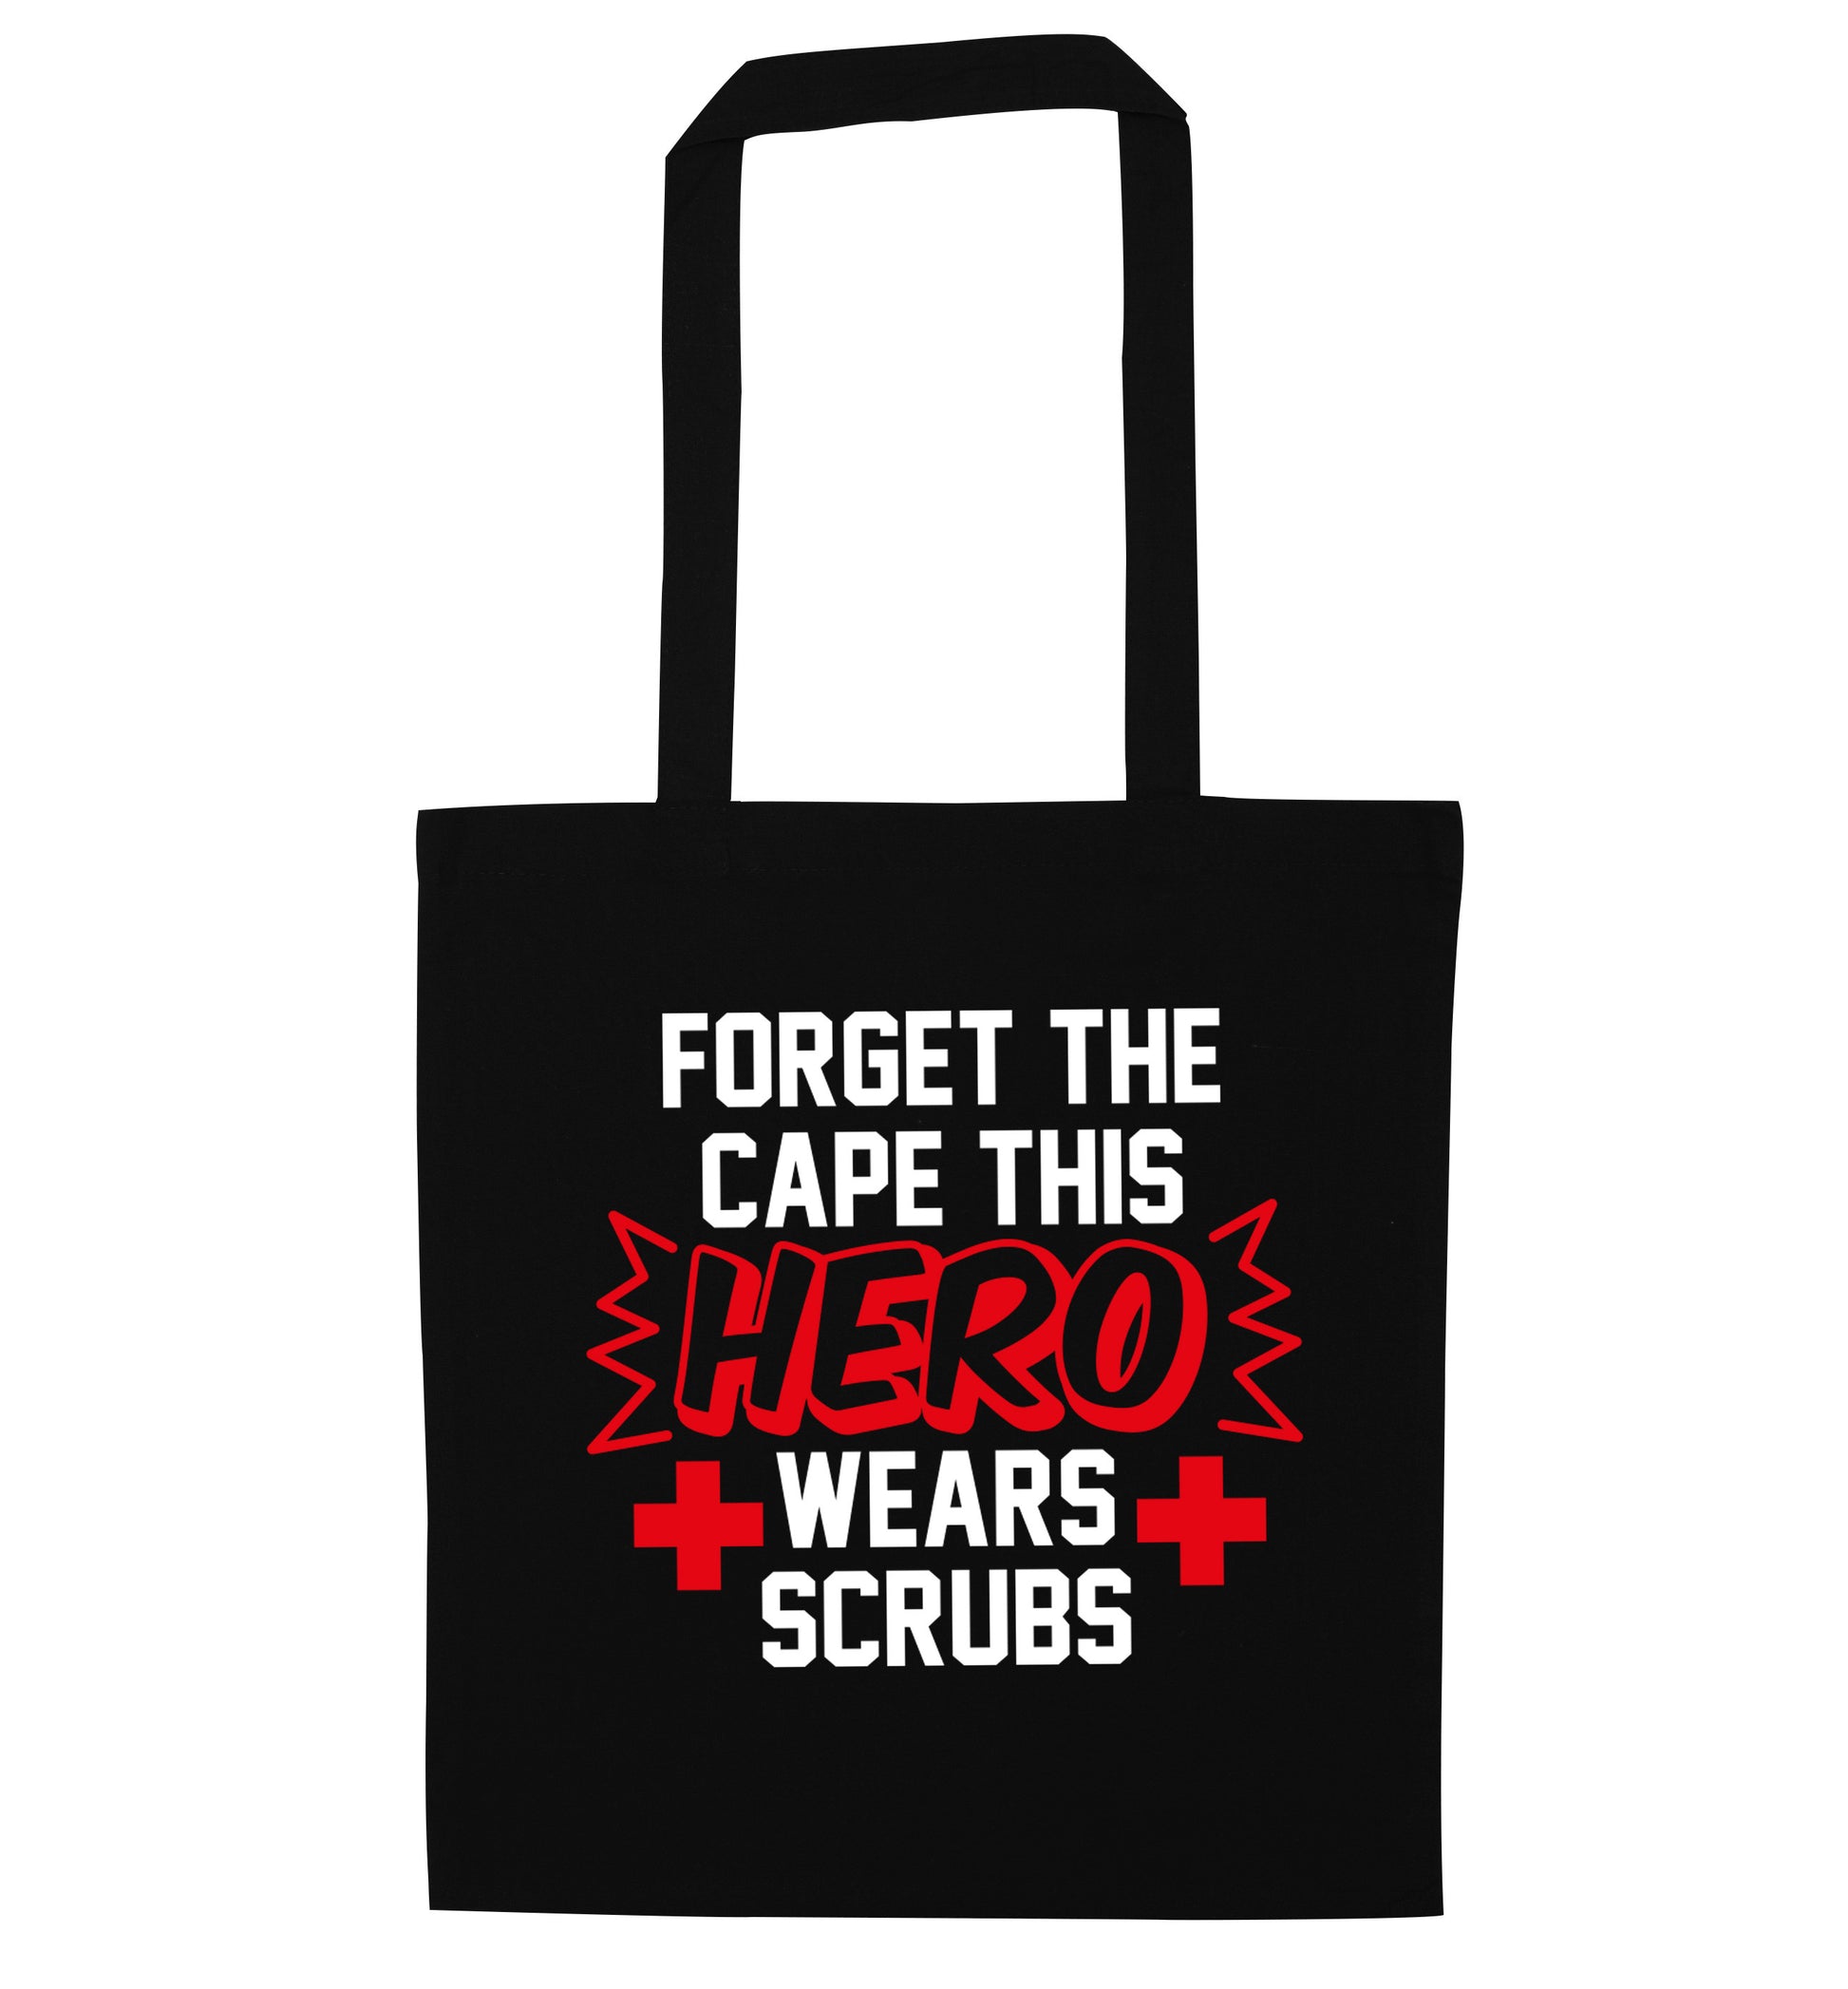 Forget the cape this hero wears scrubs black tote bag